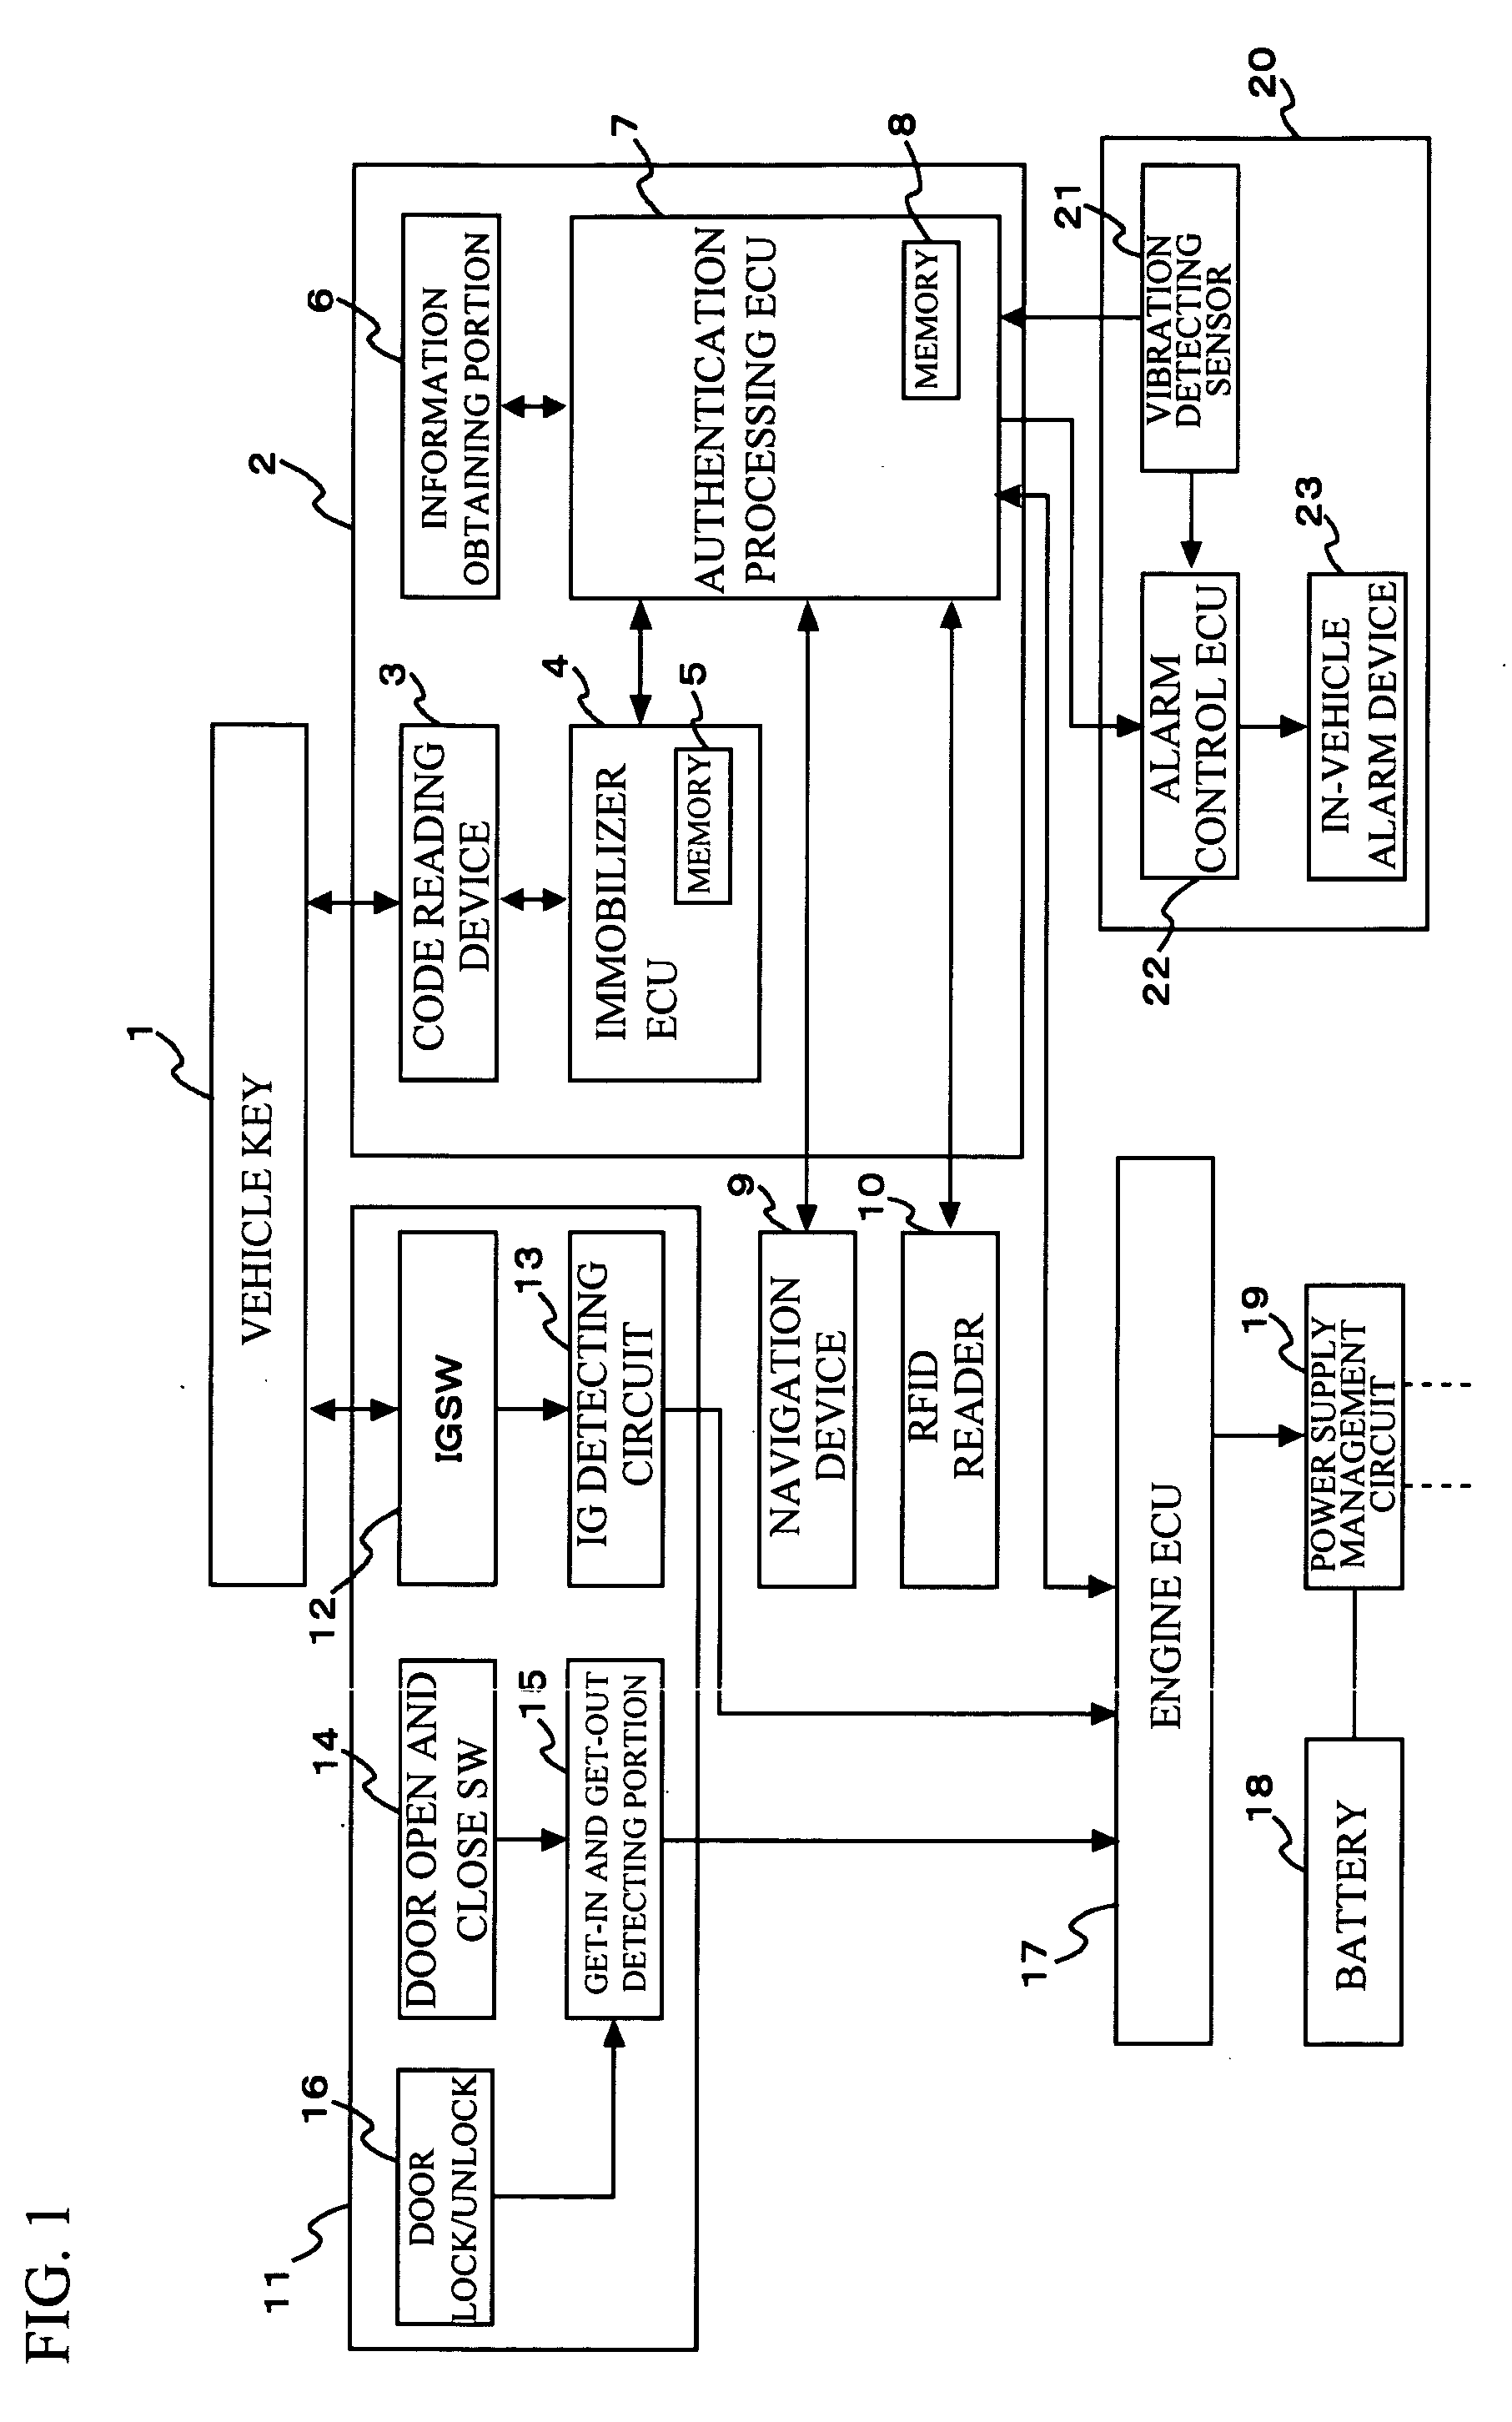 Authentication apparatus and method for use in vehicle